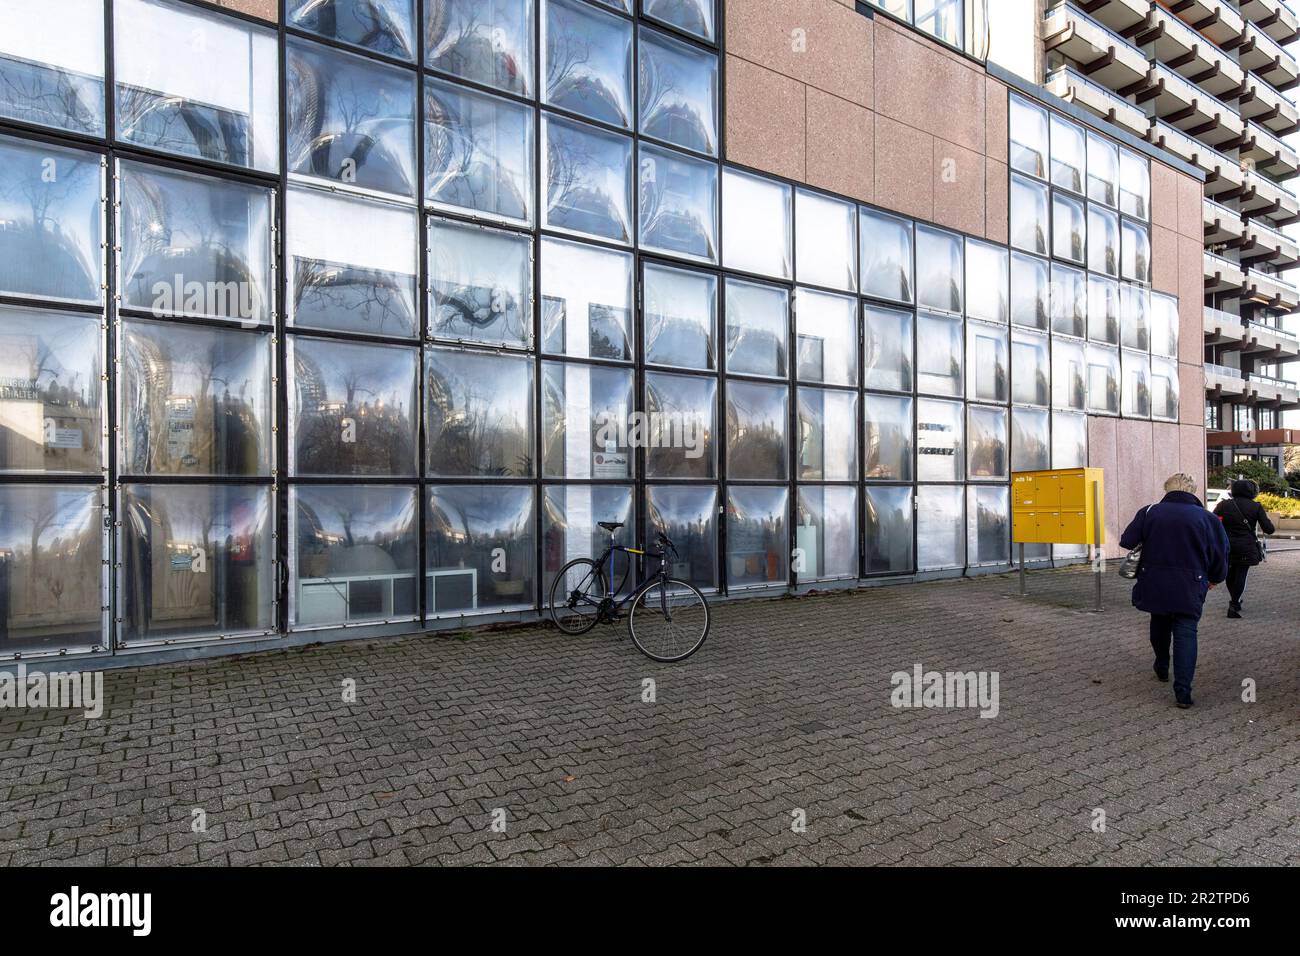 gallery house ads1a in a former transformer station in Riehl district, Bernd Kniess Architects Urban Planners, Cologne, Germany. Galeriehaus ads1a in Stock Photo